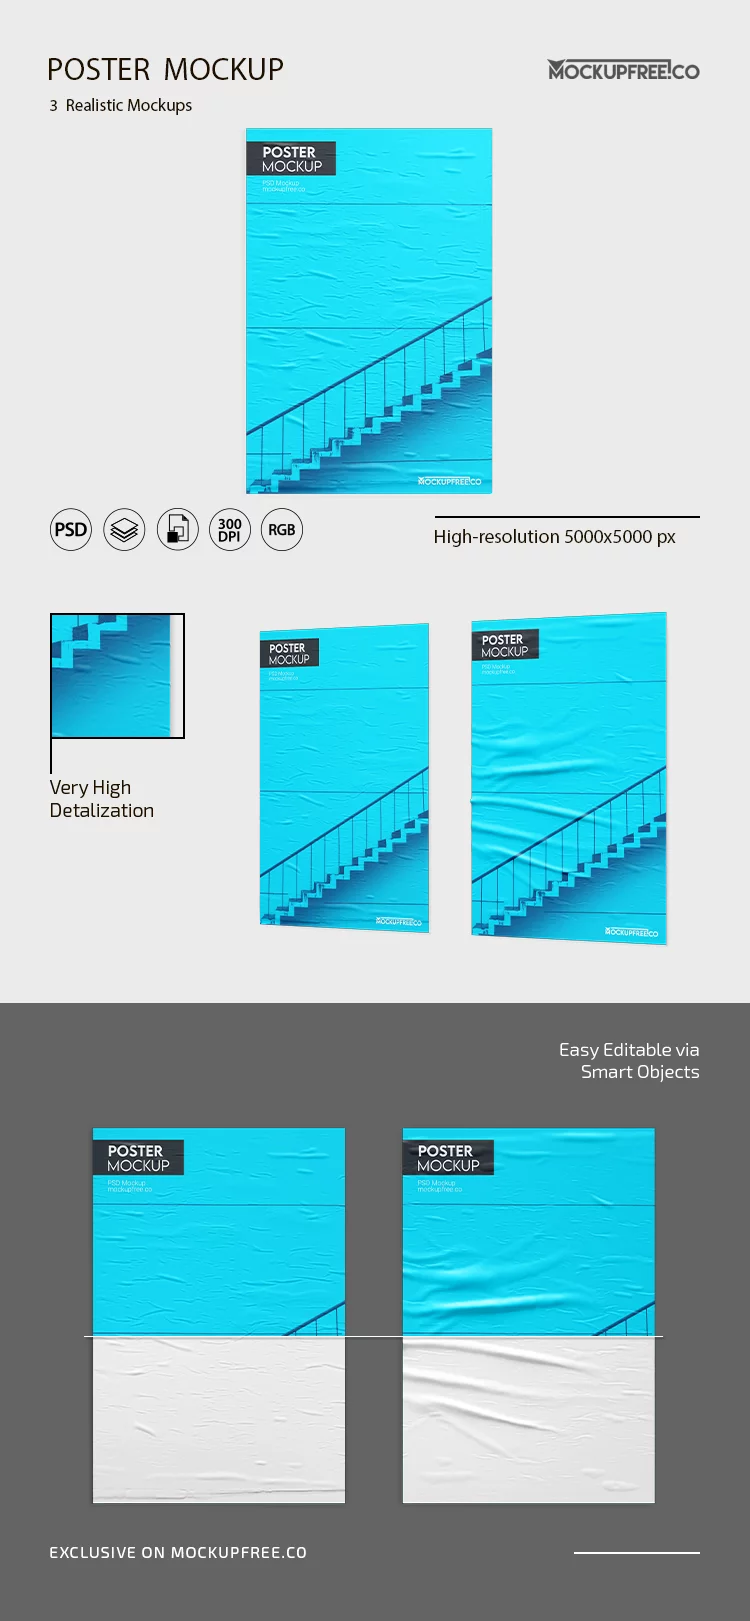 Poster Mockup PSD Template